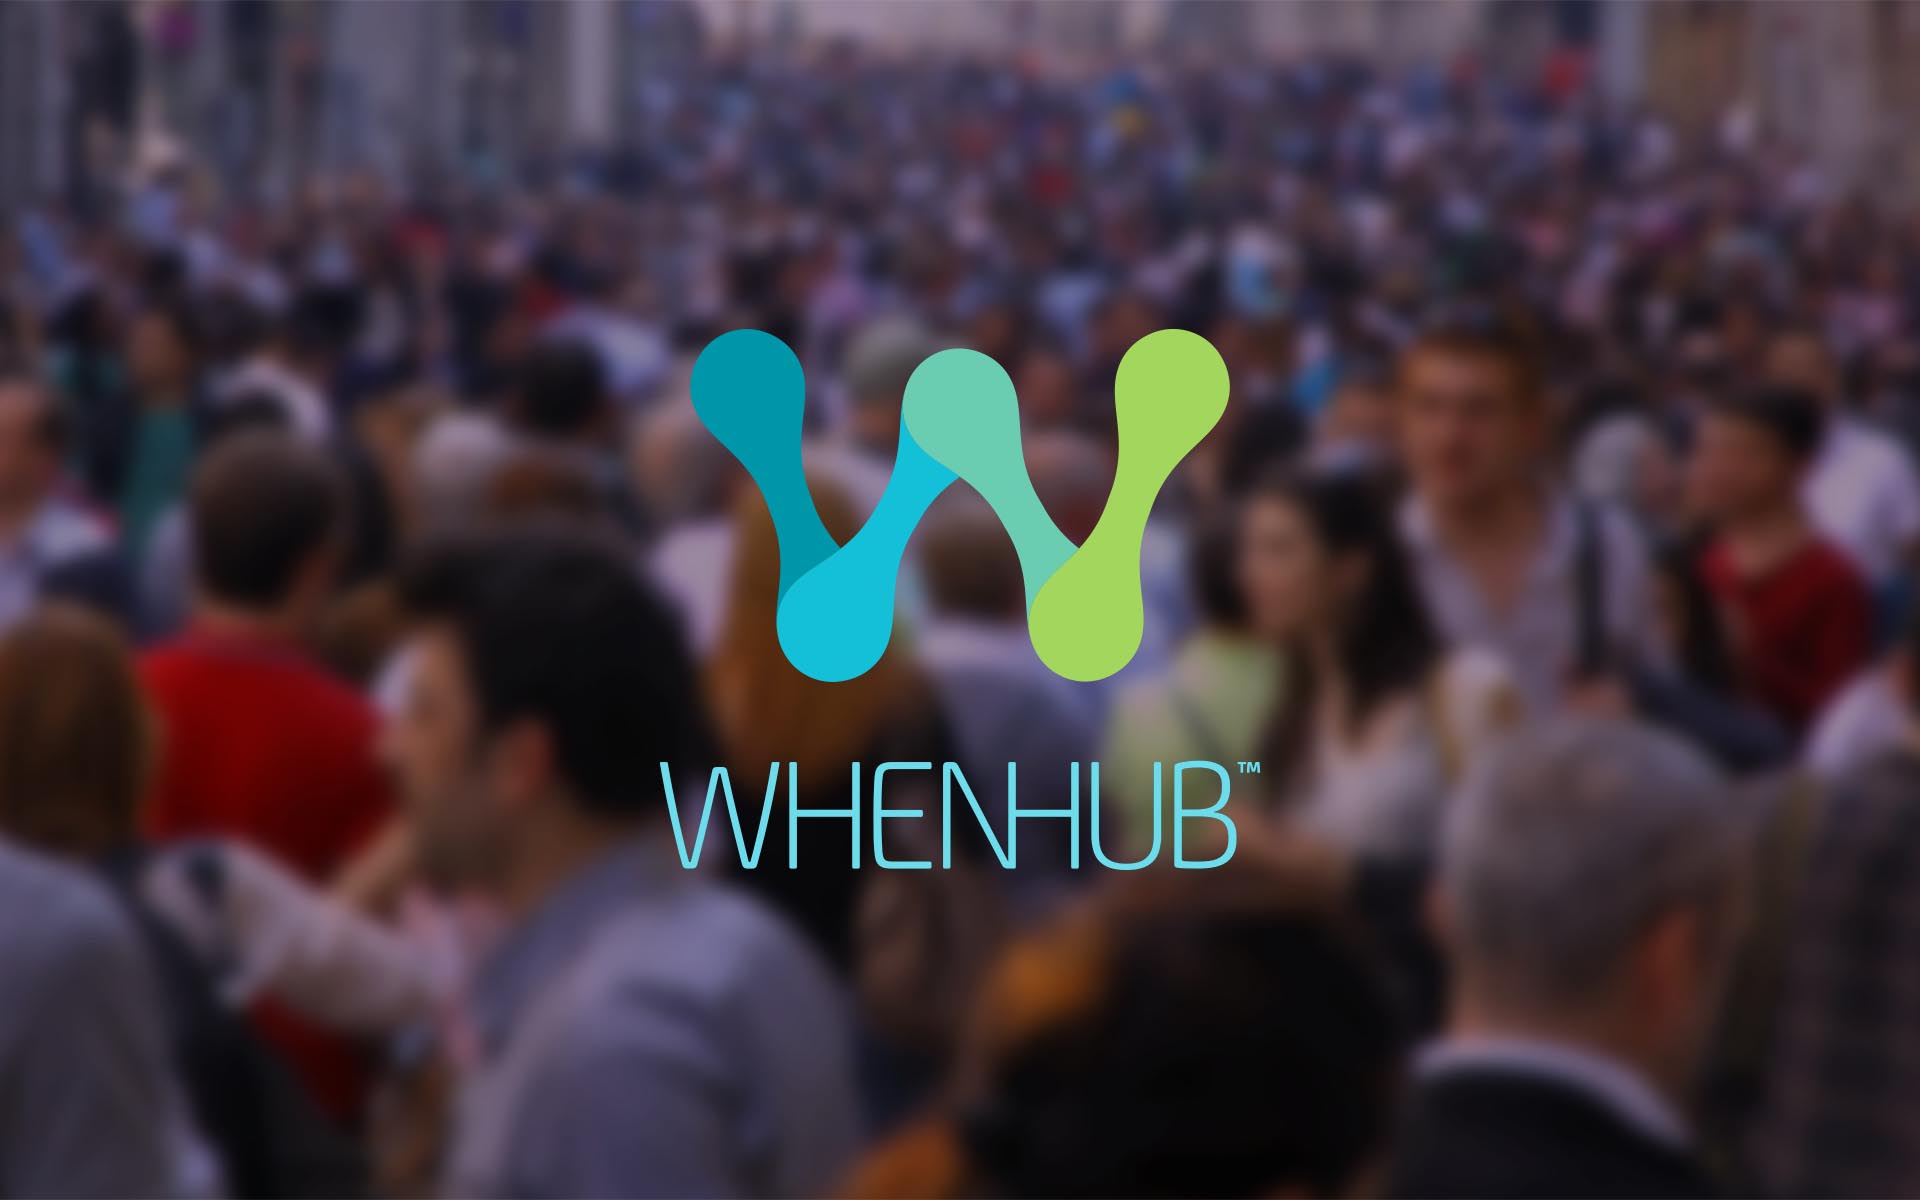 WhenHub Launches Token Sale That Will Allow Experts To Monetize Unbilled Time By Connecting With People Who Need Consulting On Any Topic Imaginable